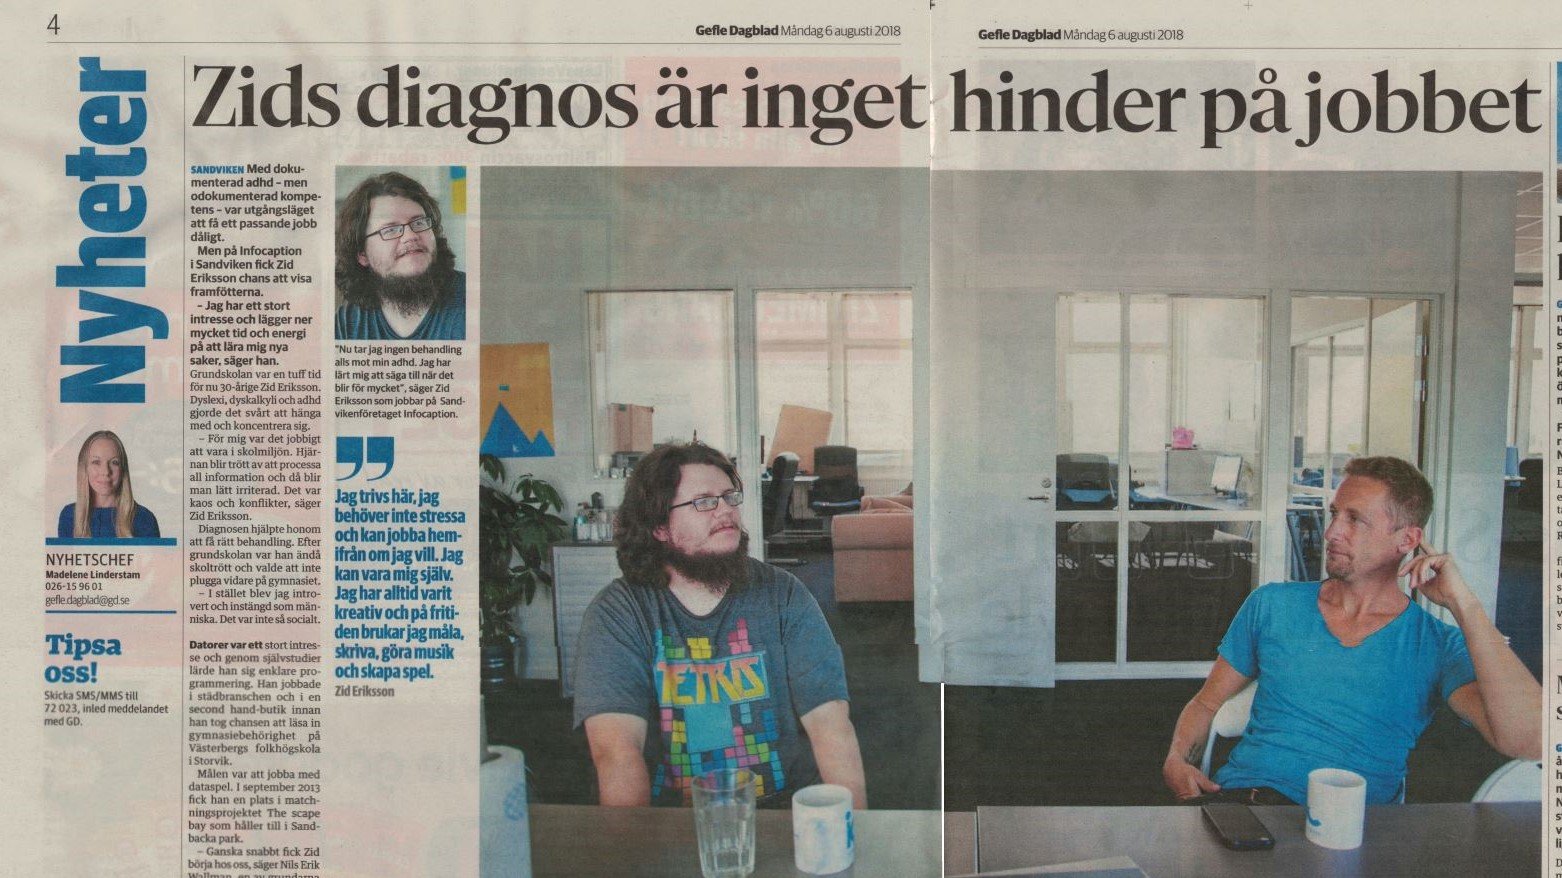 Foto of the article with the headline (translated from Swedish) "Zids diagnose is no hinder at work"